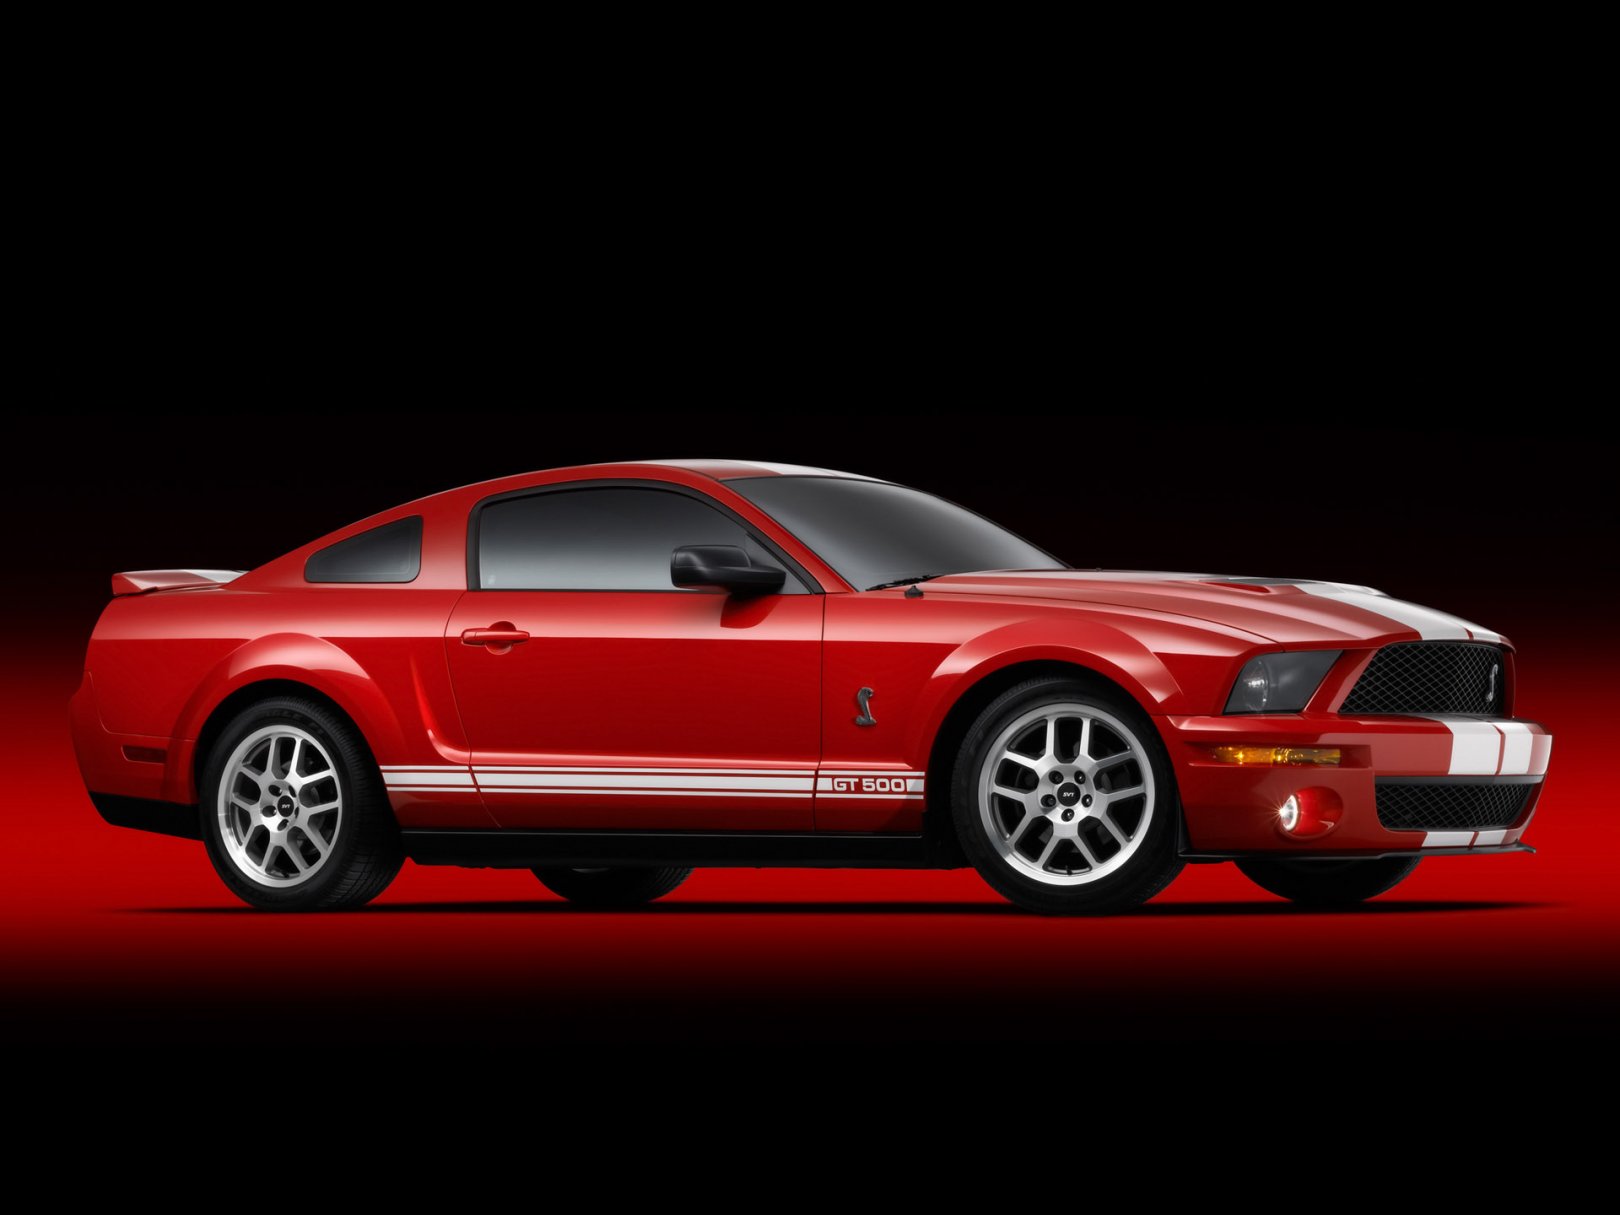 Foto: Ford Shelby GT500 Production Red SA Studio (2007)